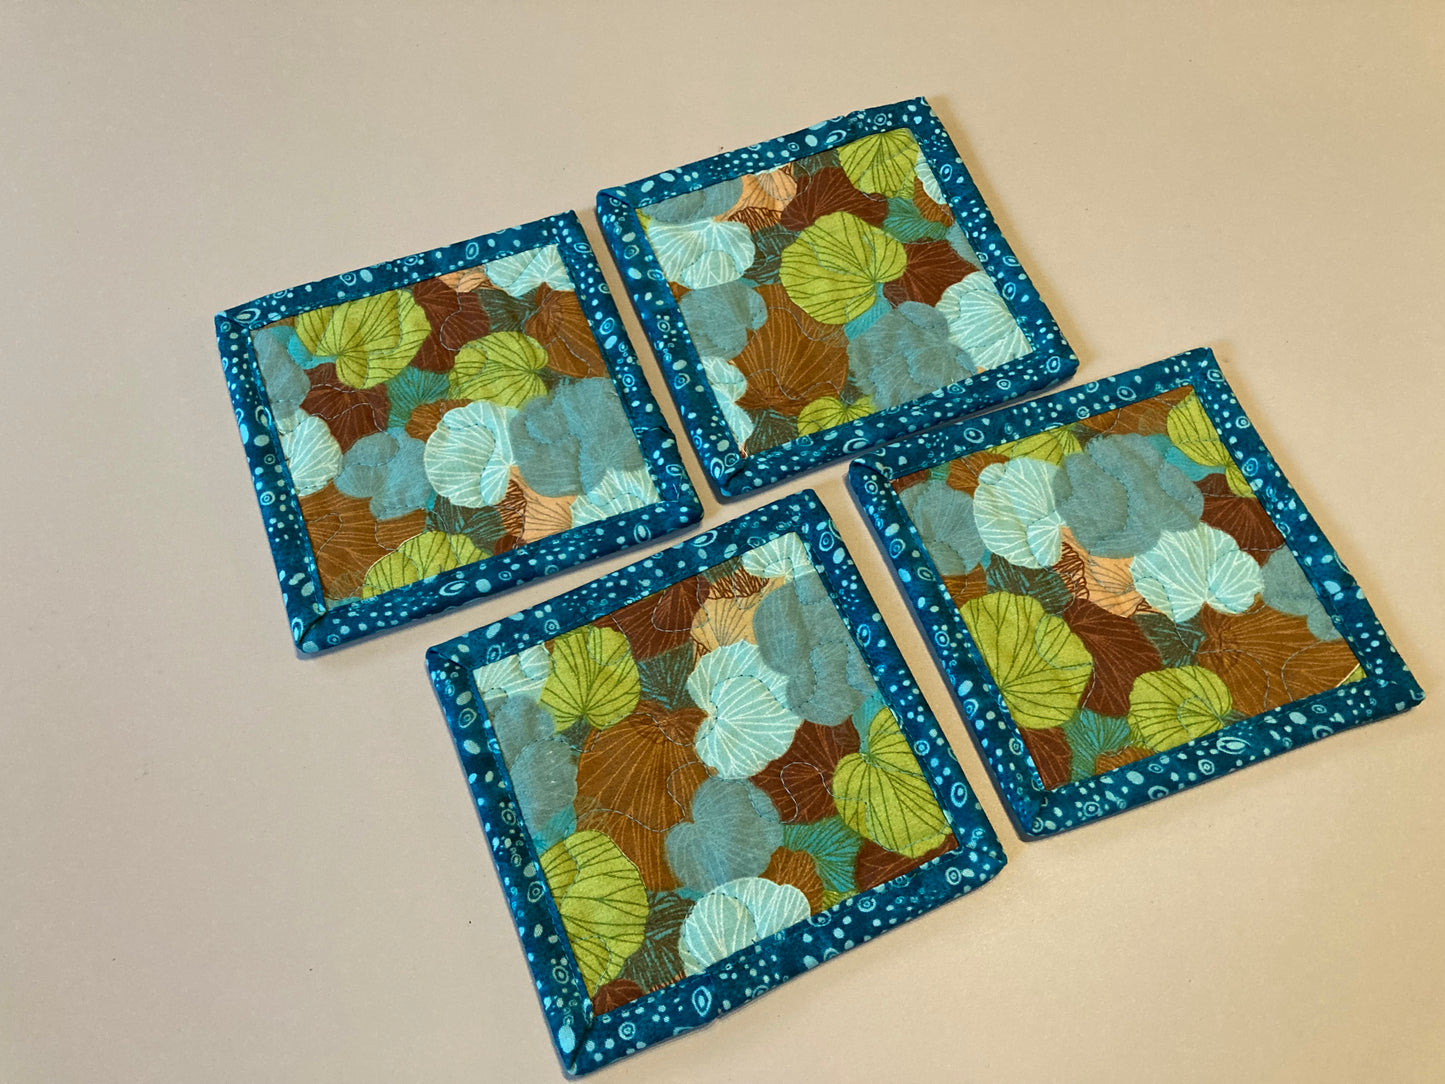 Fabric Coasters for Drinks, Blue Brown Green Ginko Leaves, Quilted Handmade Drink Mats, Mug Rugs Tea Coffee Hot Cold Snack Mats 5x5"